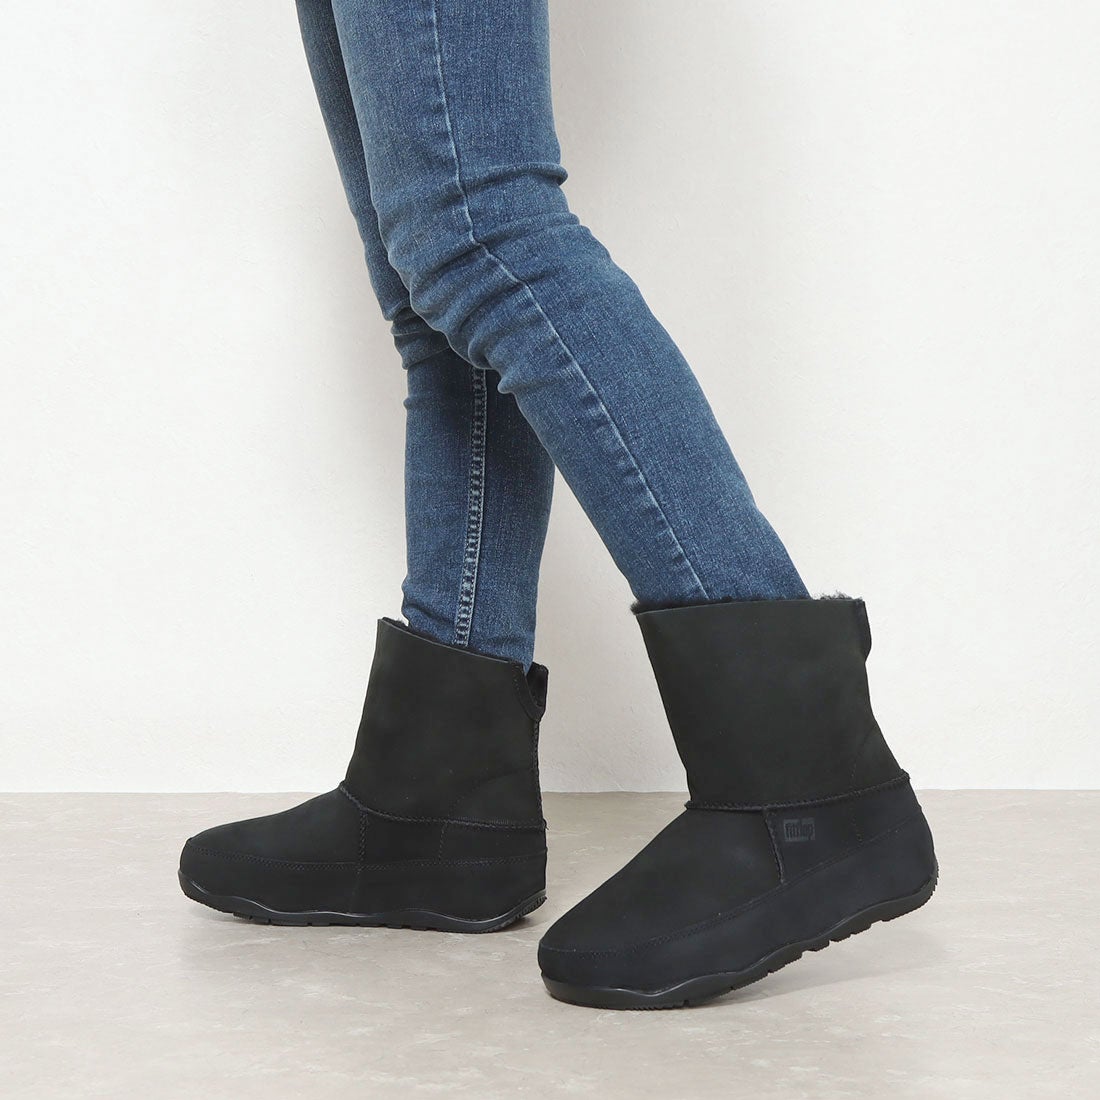 ORIGINAL MUKLUK SHORTY DOUBLE-FACE SHEARLING BOOTS （All Black） -fitflop 公式オンラインストア